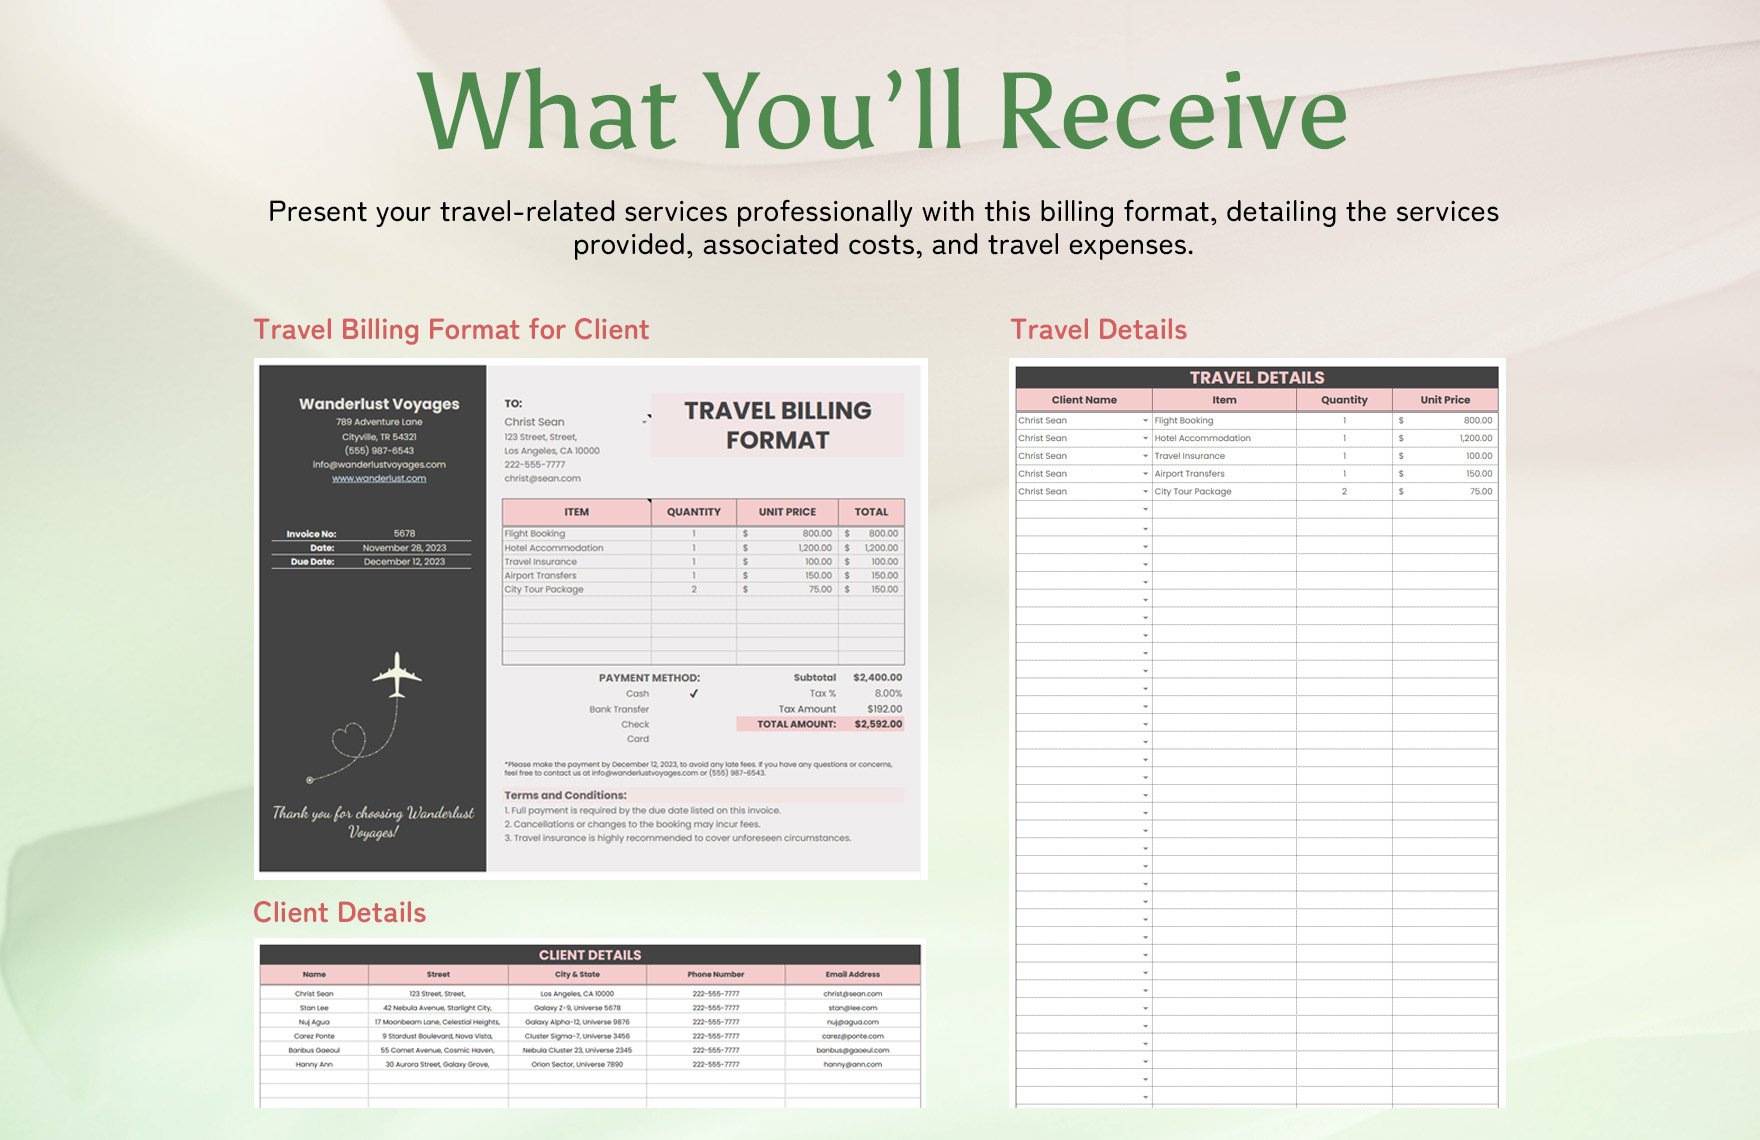 Travel Billing Format for Client Template